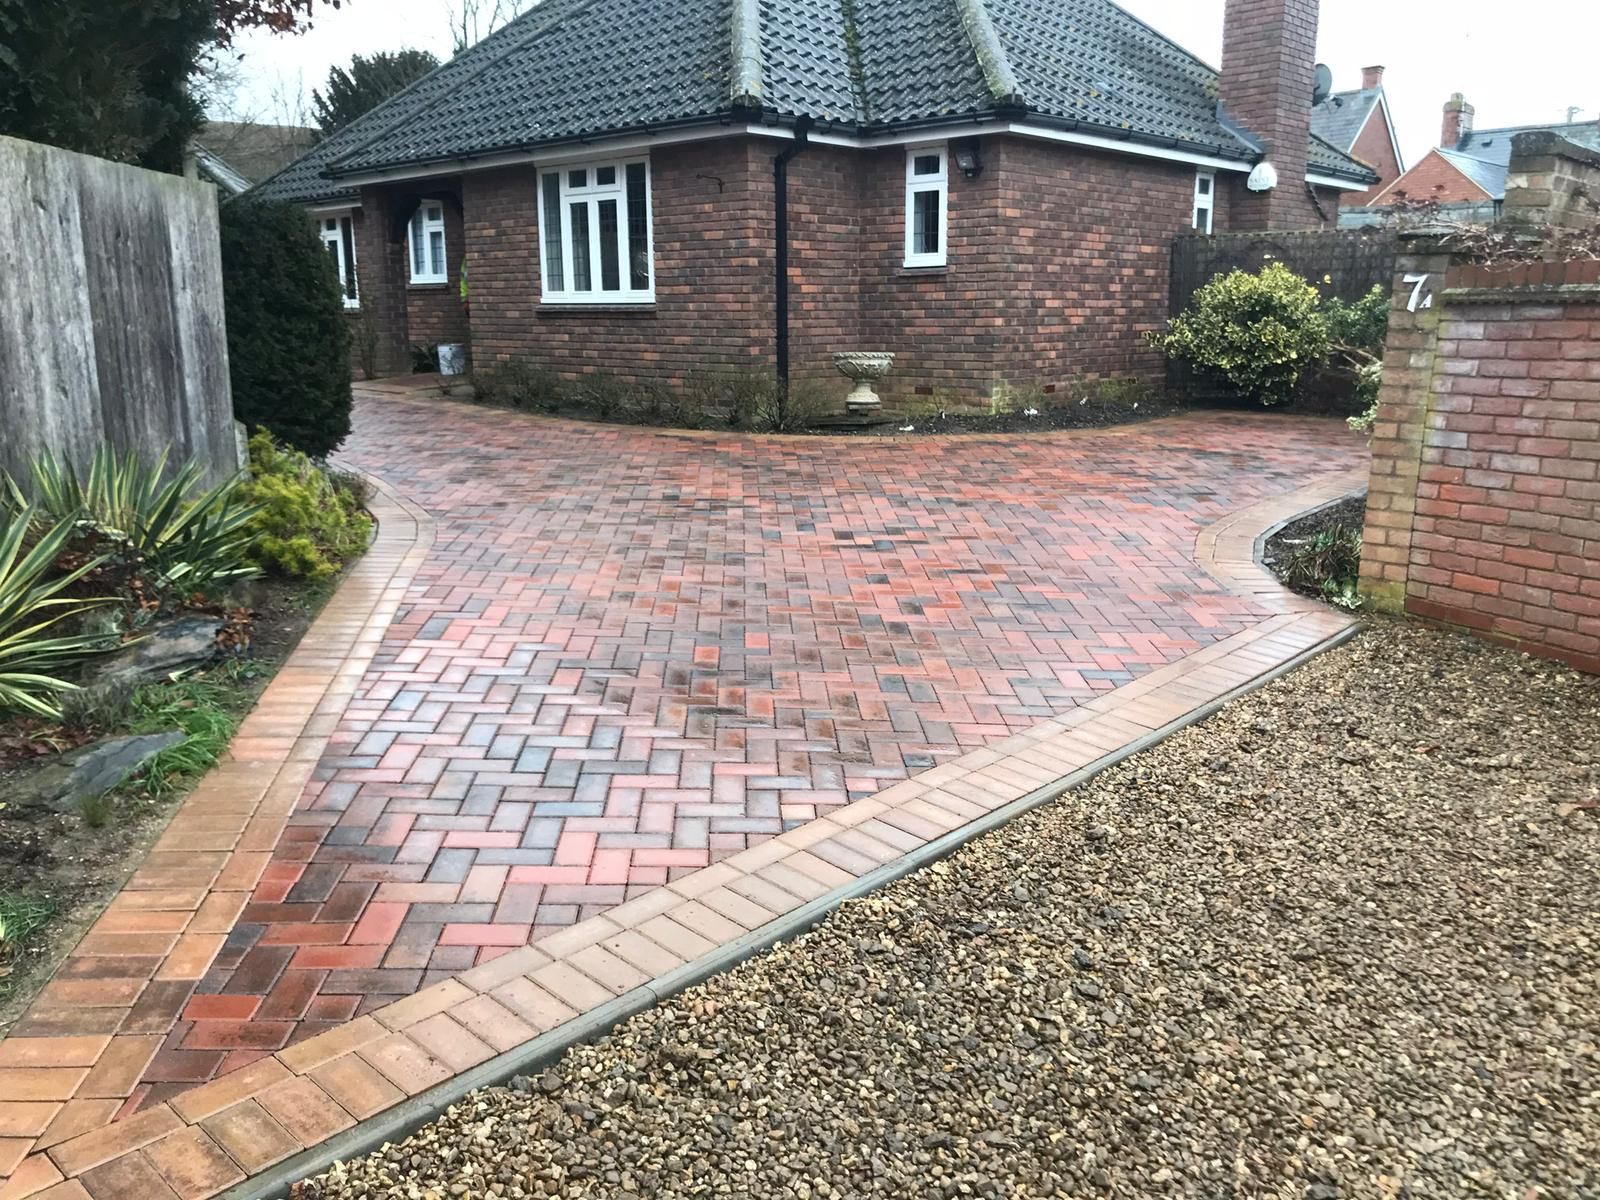 Milton Keynes block paving driveway specialists Quality Paving install quality driveways and patios in Milton Keynes and surrounding areas